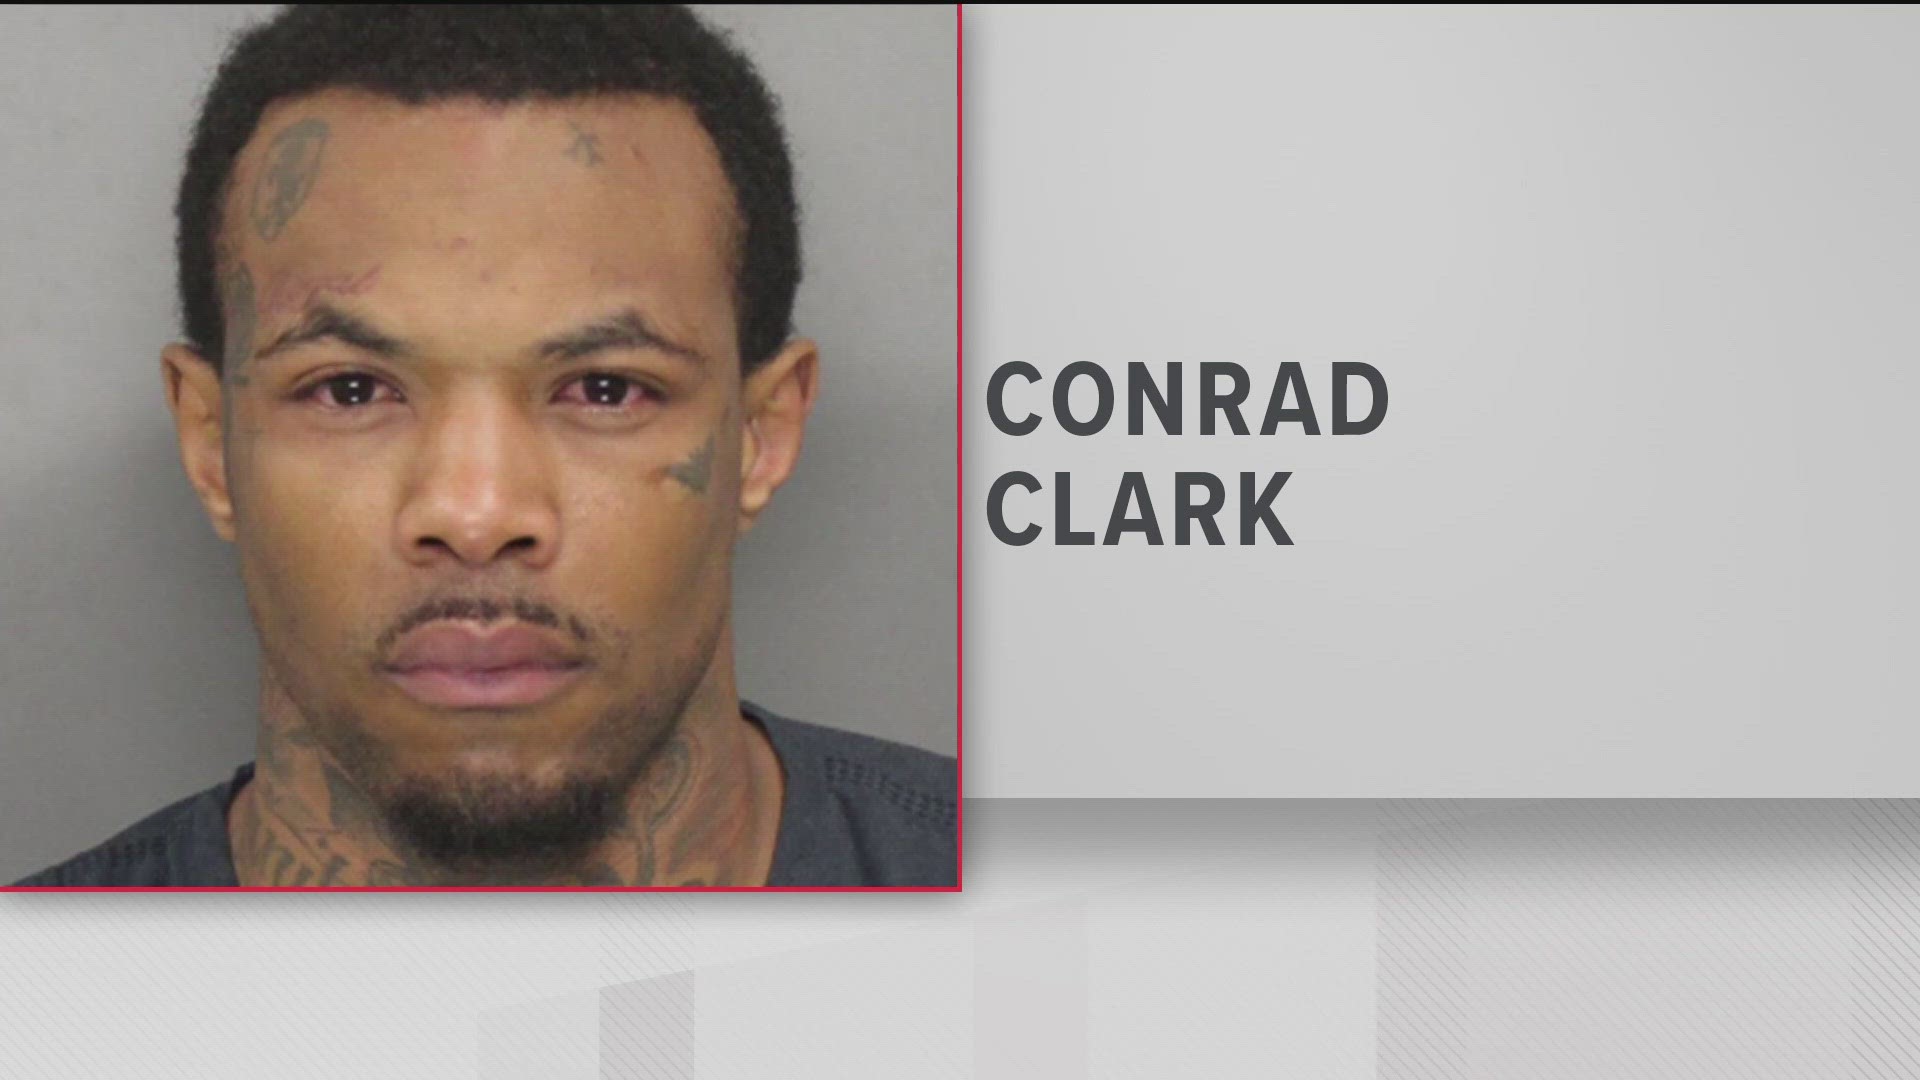 Arrest warrants show Conrad Carrington Clark is facing charges in the case surrounding the boy's death. The shooting happened along White Circle off N Cobb Pkwy.